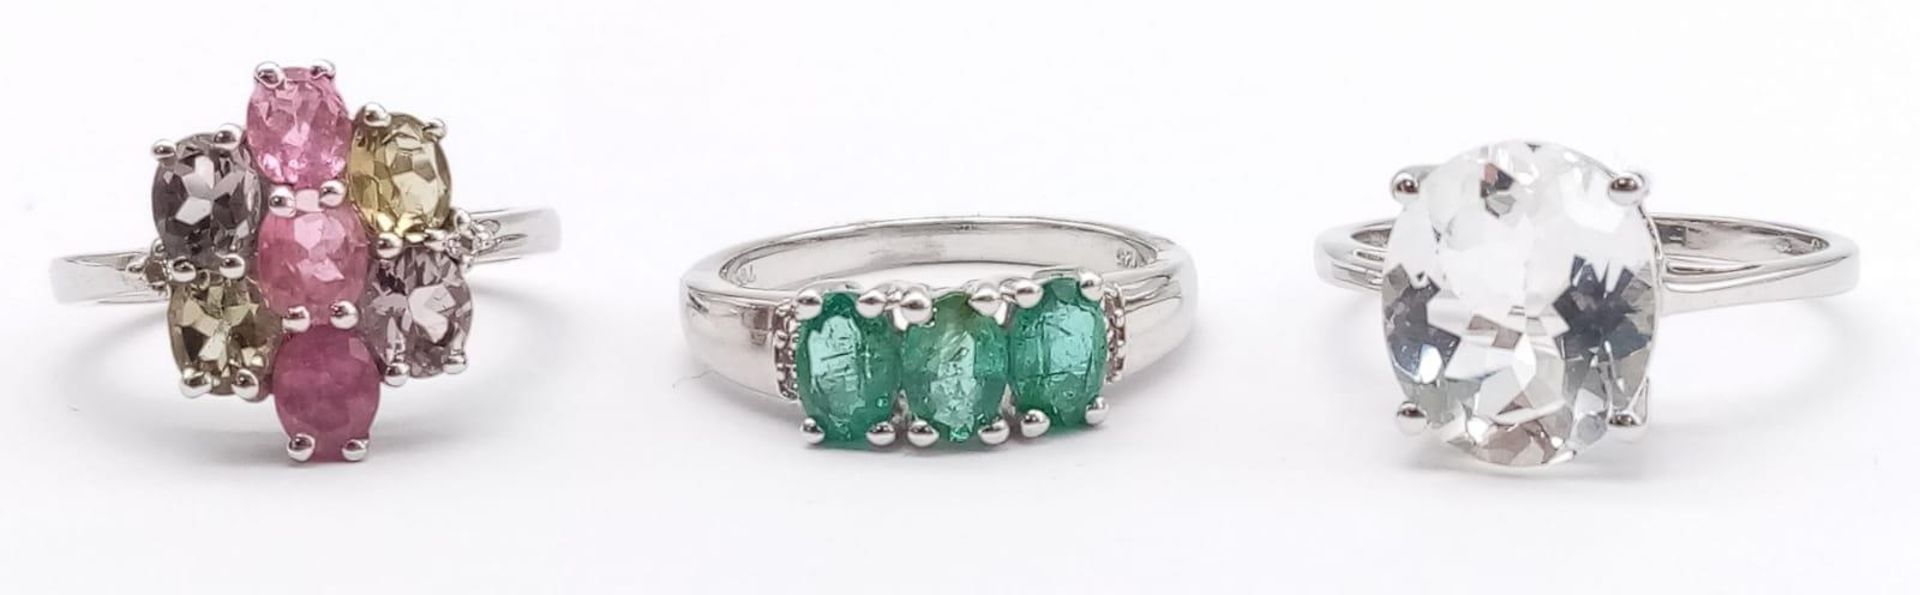 Three 925 Sterling Silver Gemstone Rings: Tourmaline - Size N, Topaz - Size S and Emerald - Size P. - Image 2 of 4